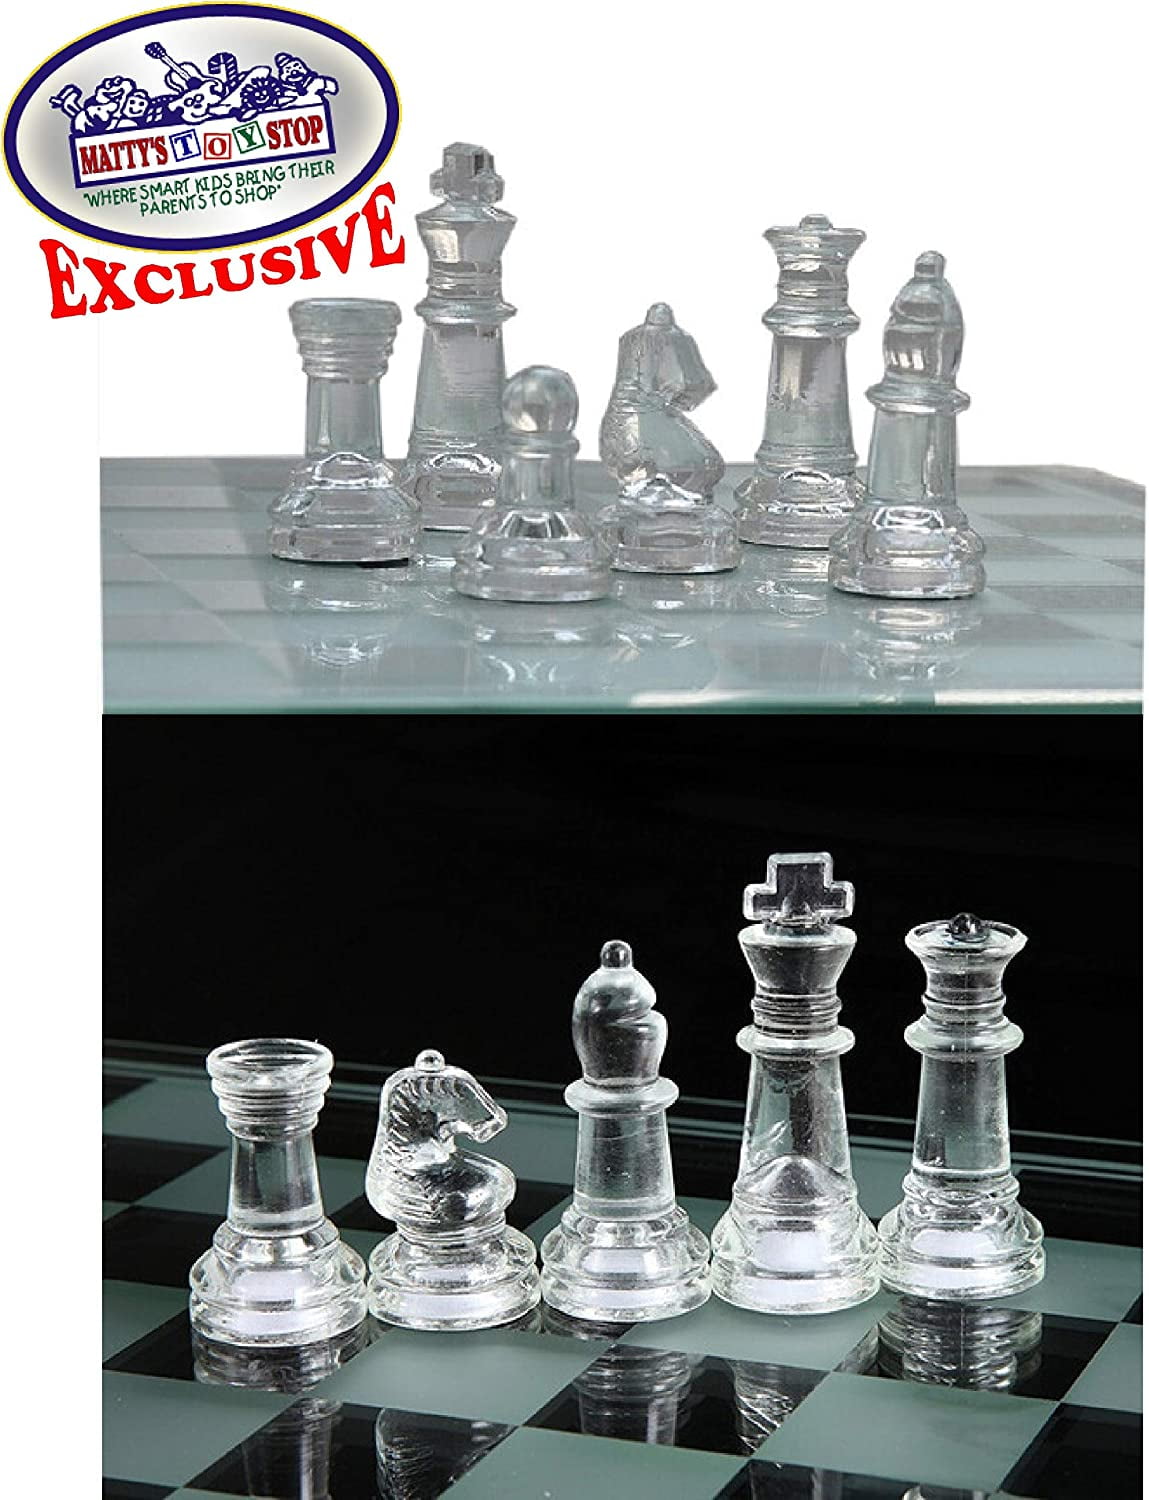  SAFIGLE 2 Sets Chess Pieces Games Props Games Hotels Party Game  House Toys Game Hotel House Props Mini Accessories Board Game Hotel Row  Plastic Small House : Toys & Games